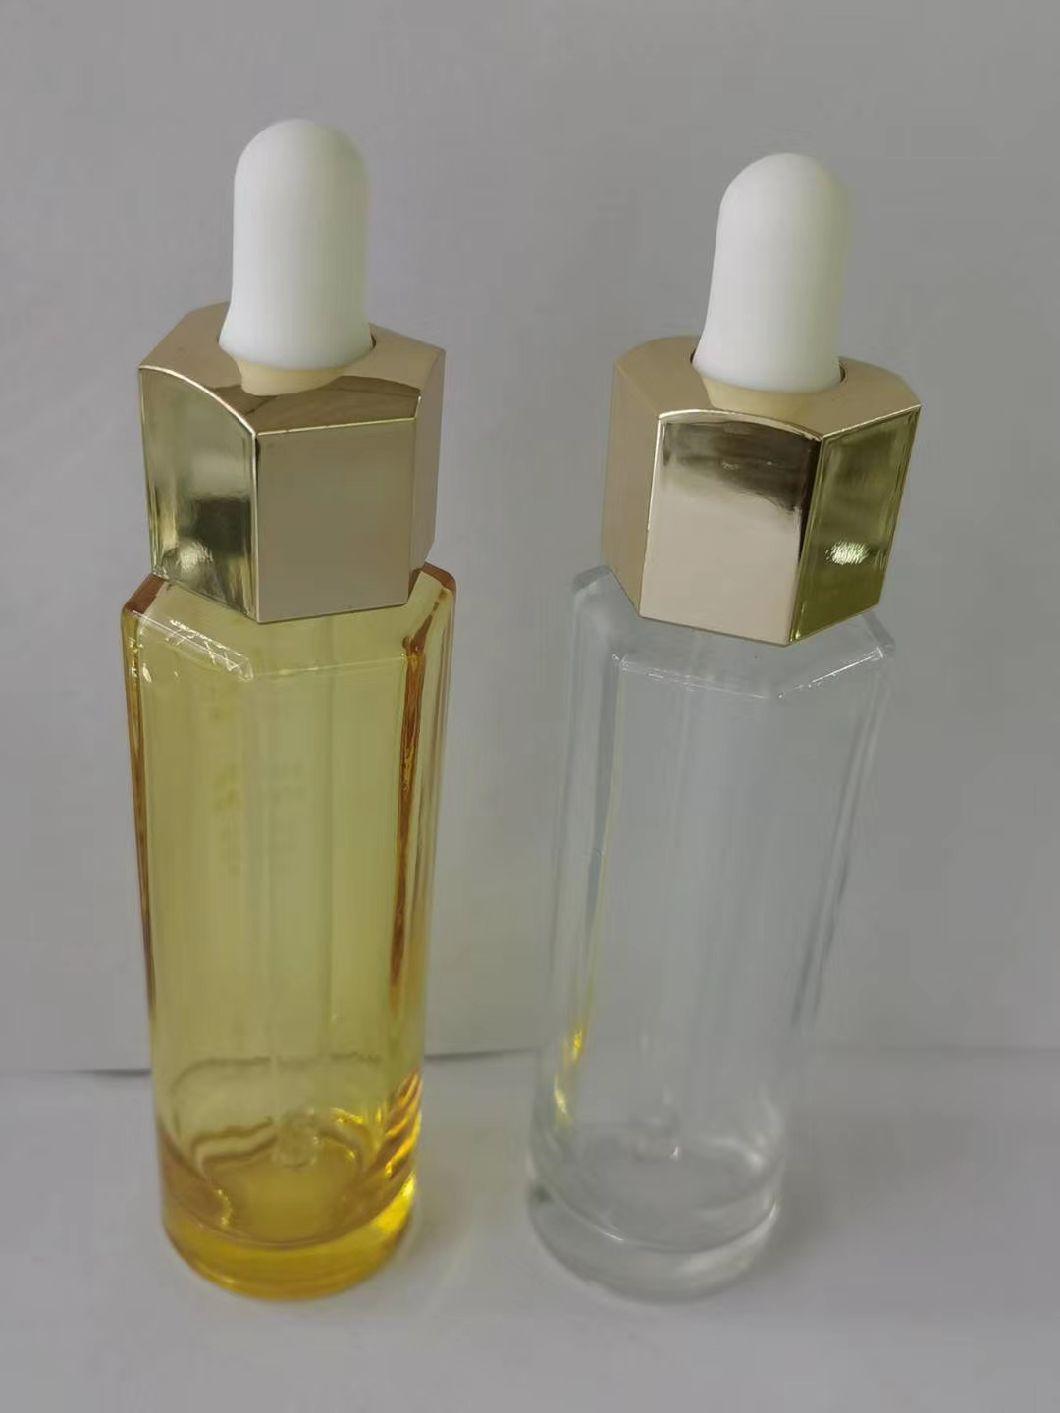 Ds022  High Quality Essence Bottles Have Stock